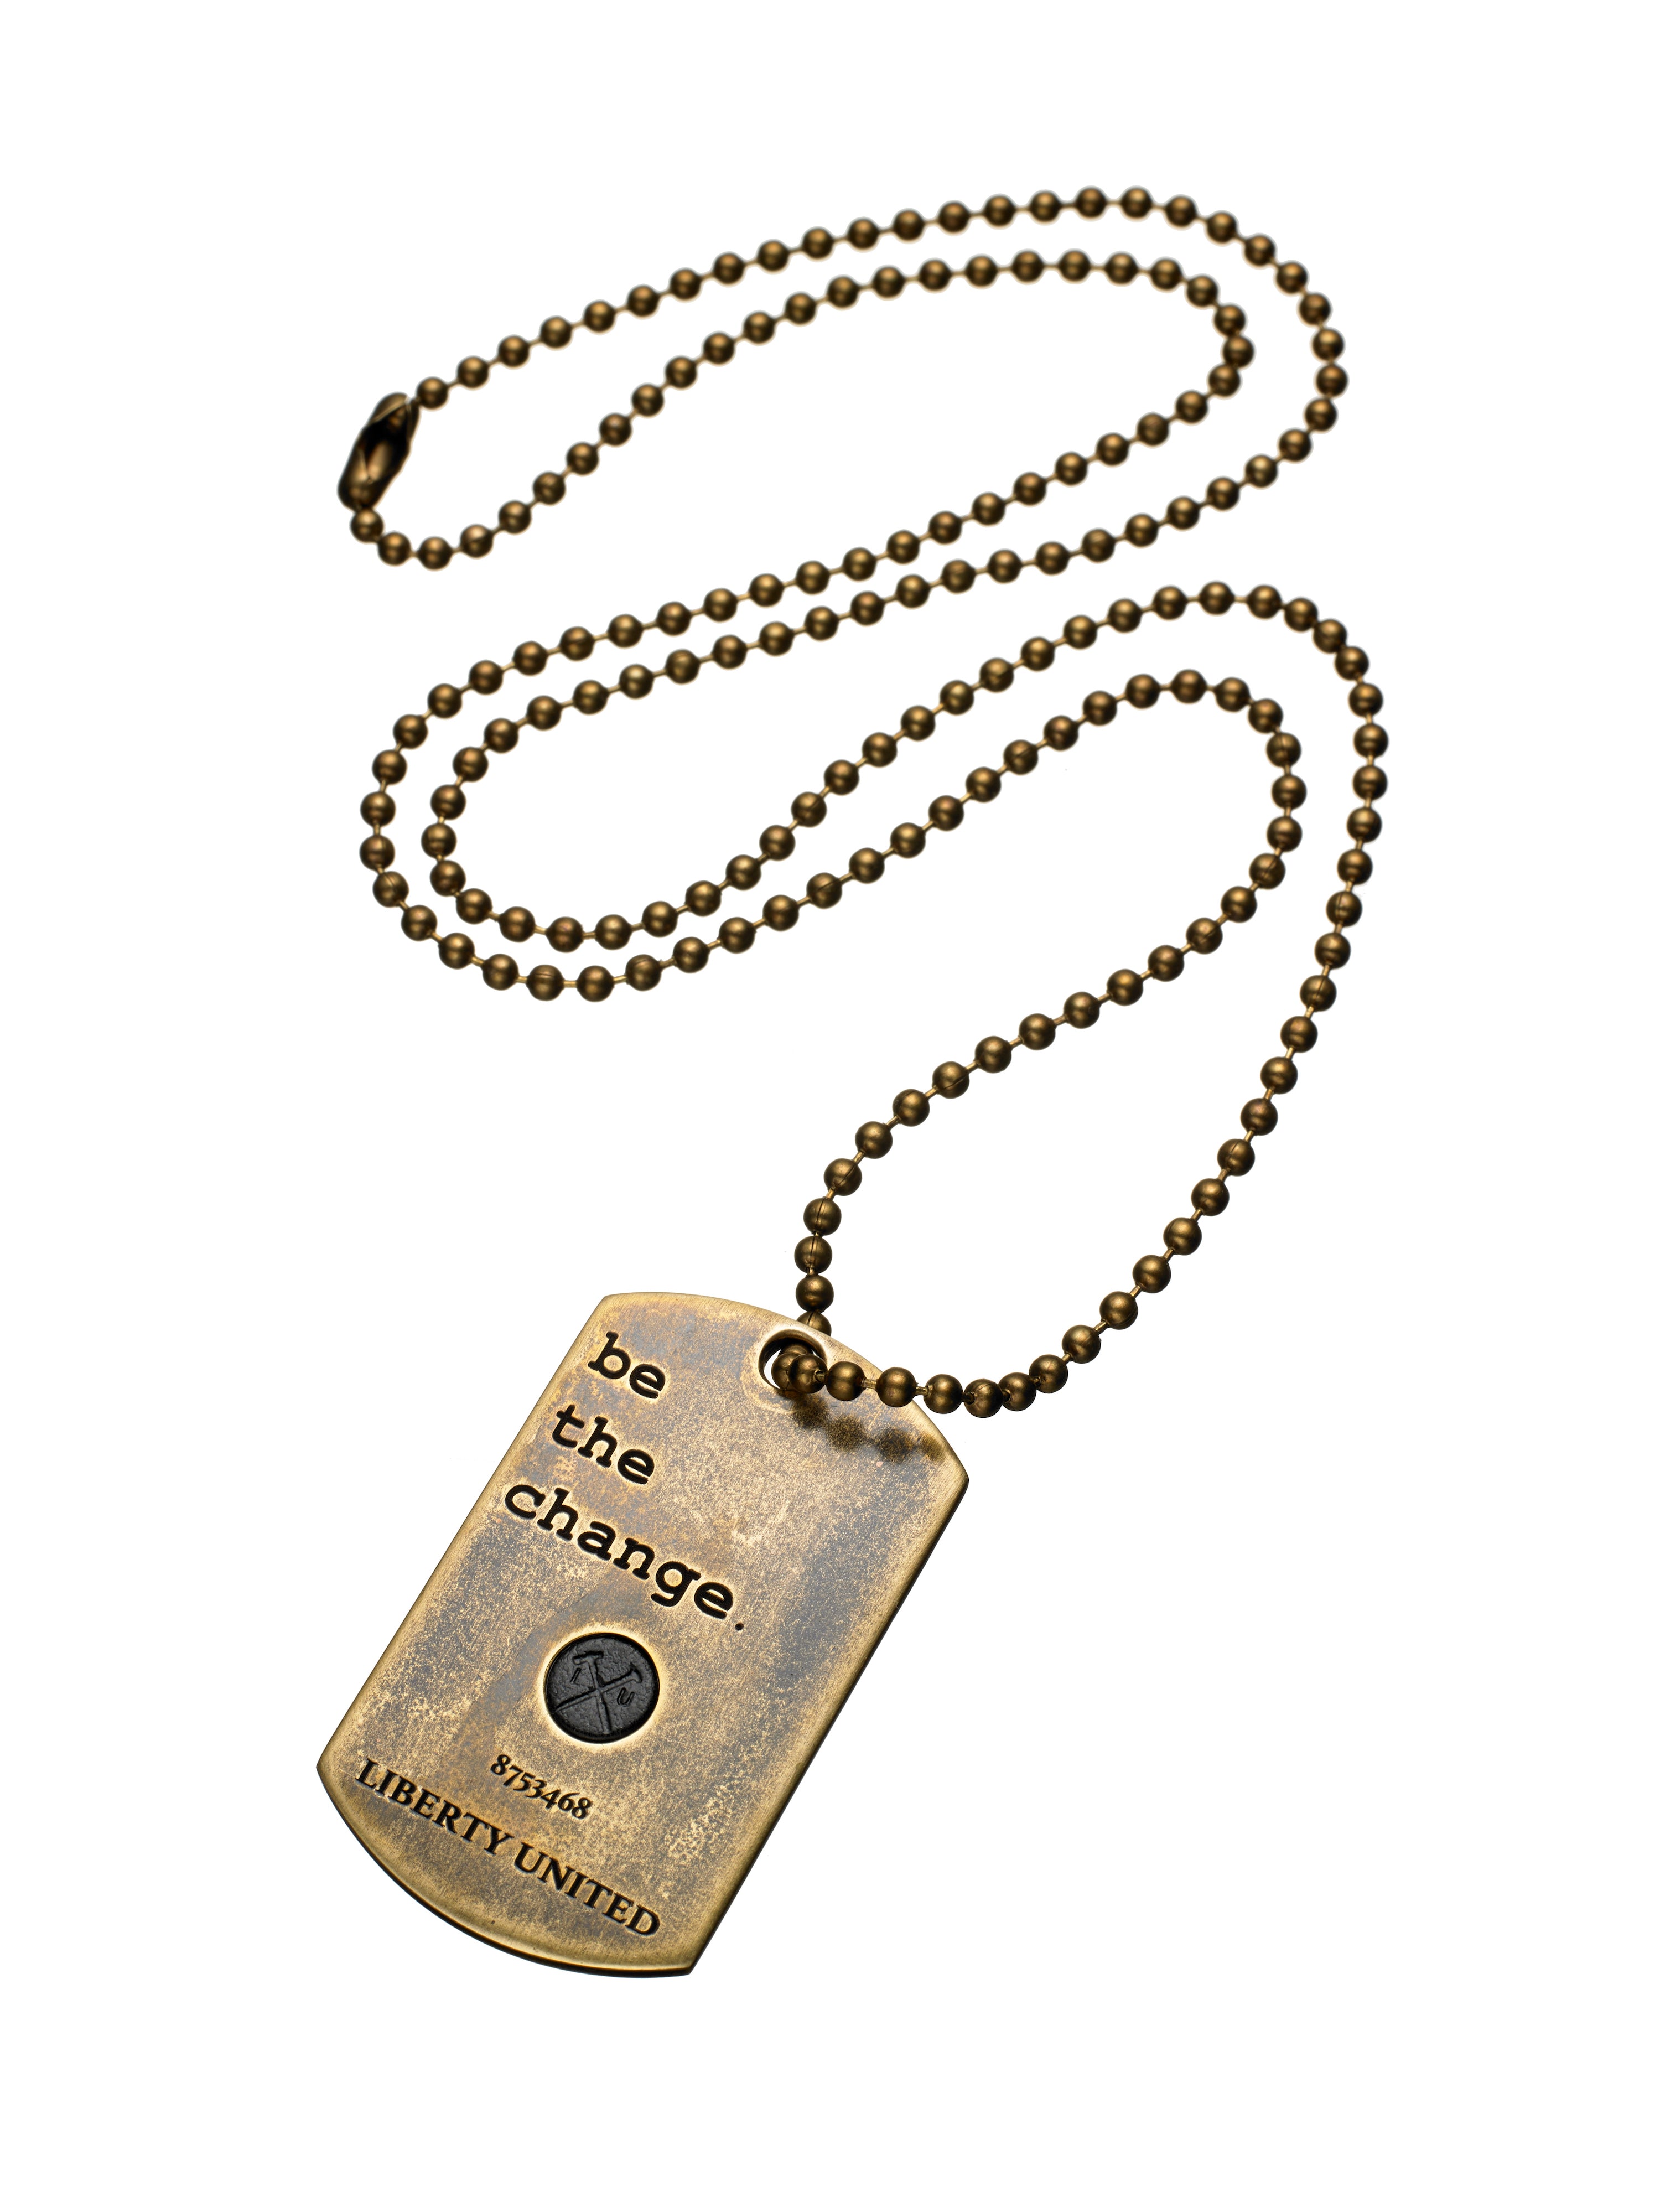 Dog Tag Chains, Dog Tag Necklaces